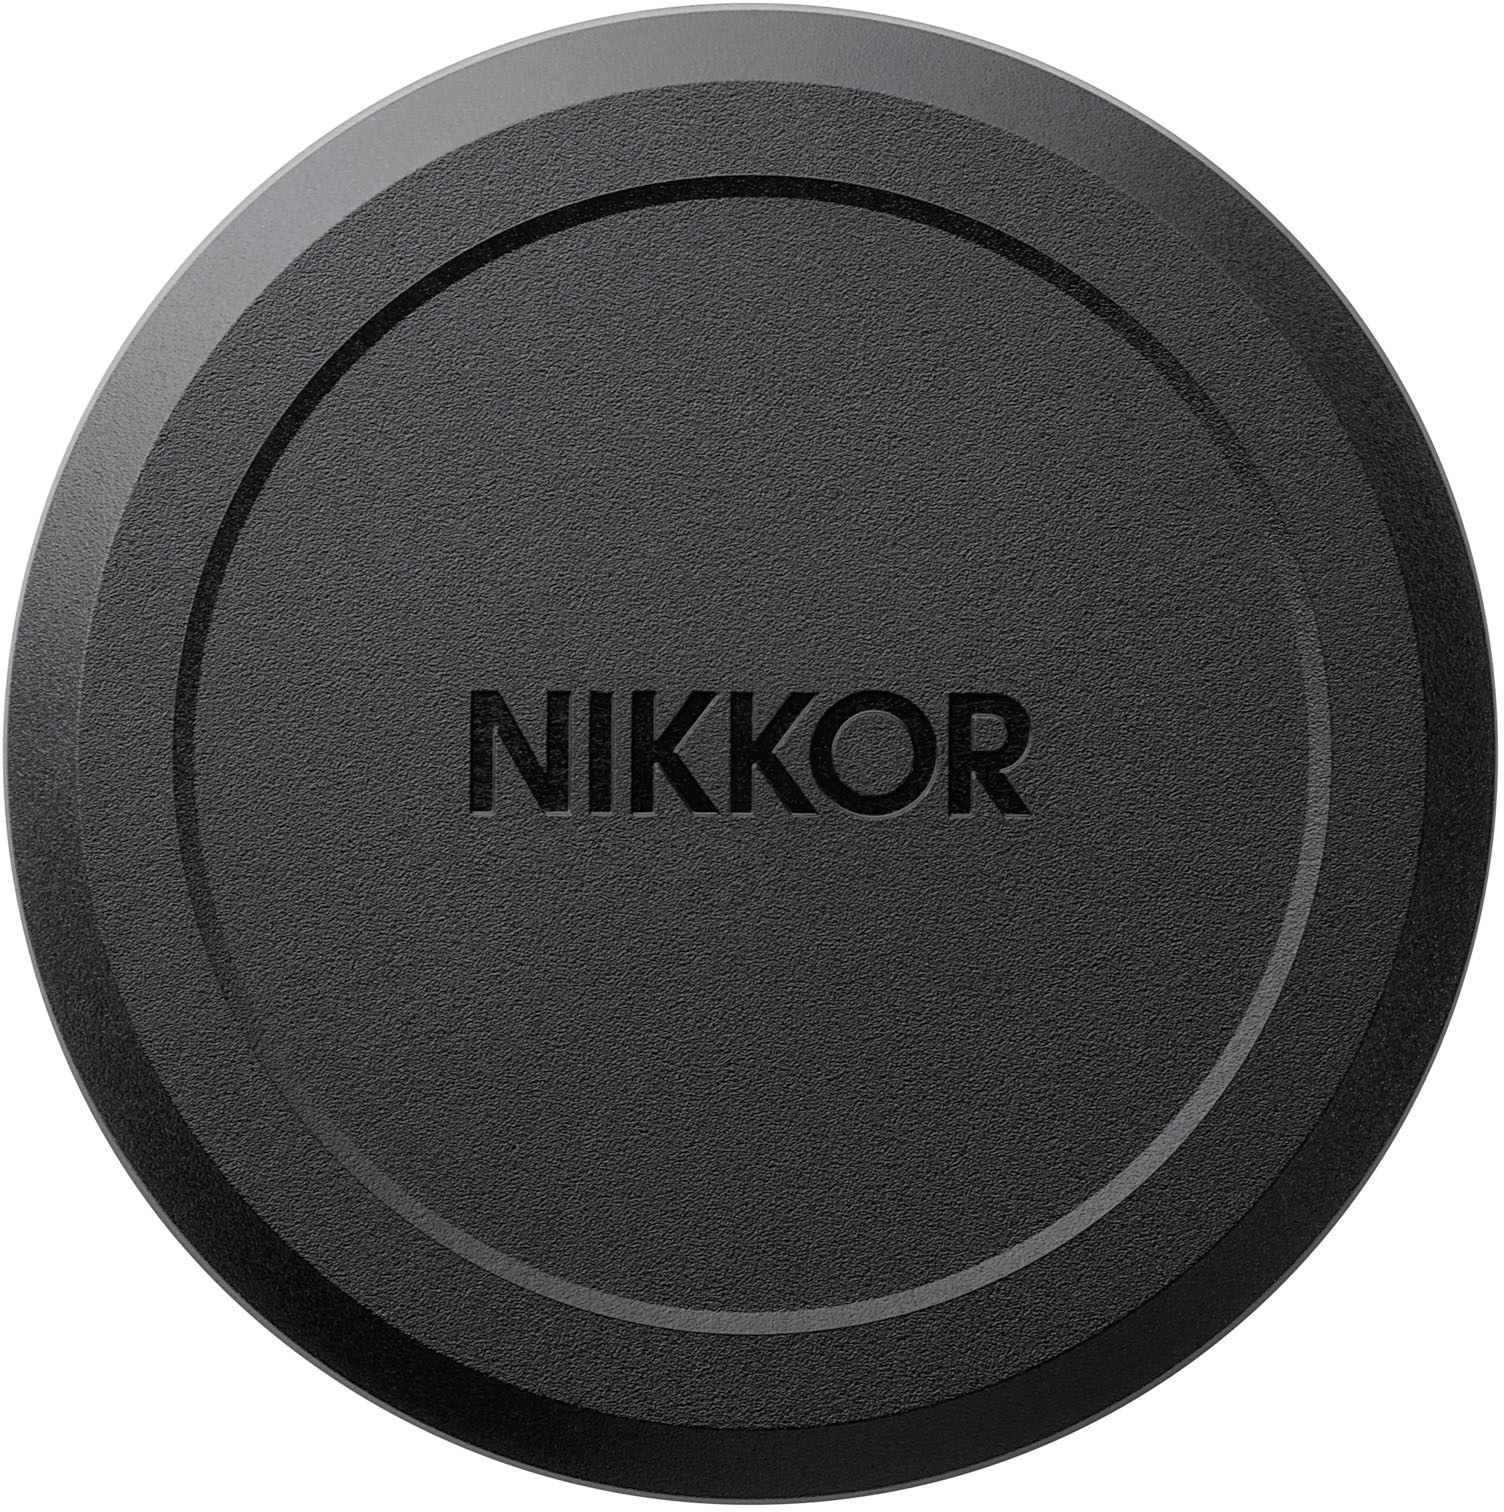 Nikon NIKKOR Z 26mm f/2.8 Wide-Angle Lens for Z Series Mirrorless